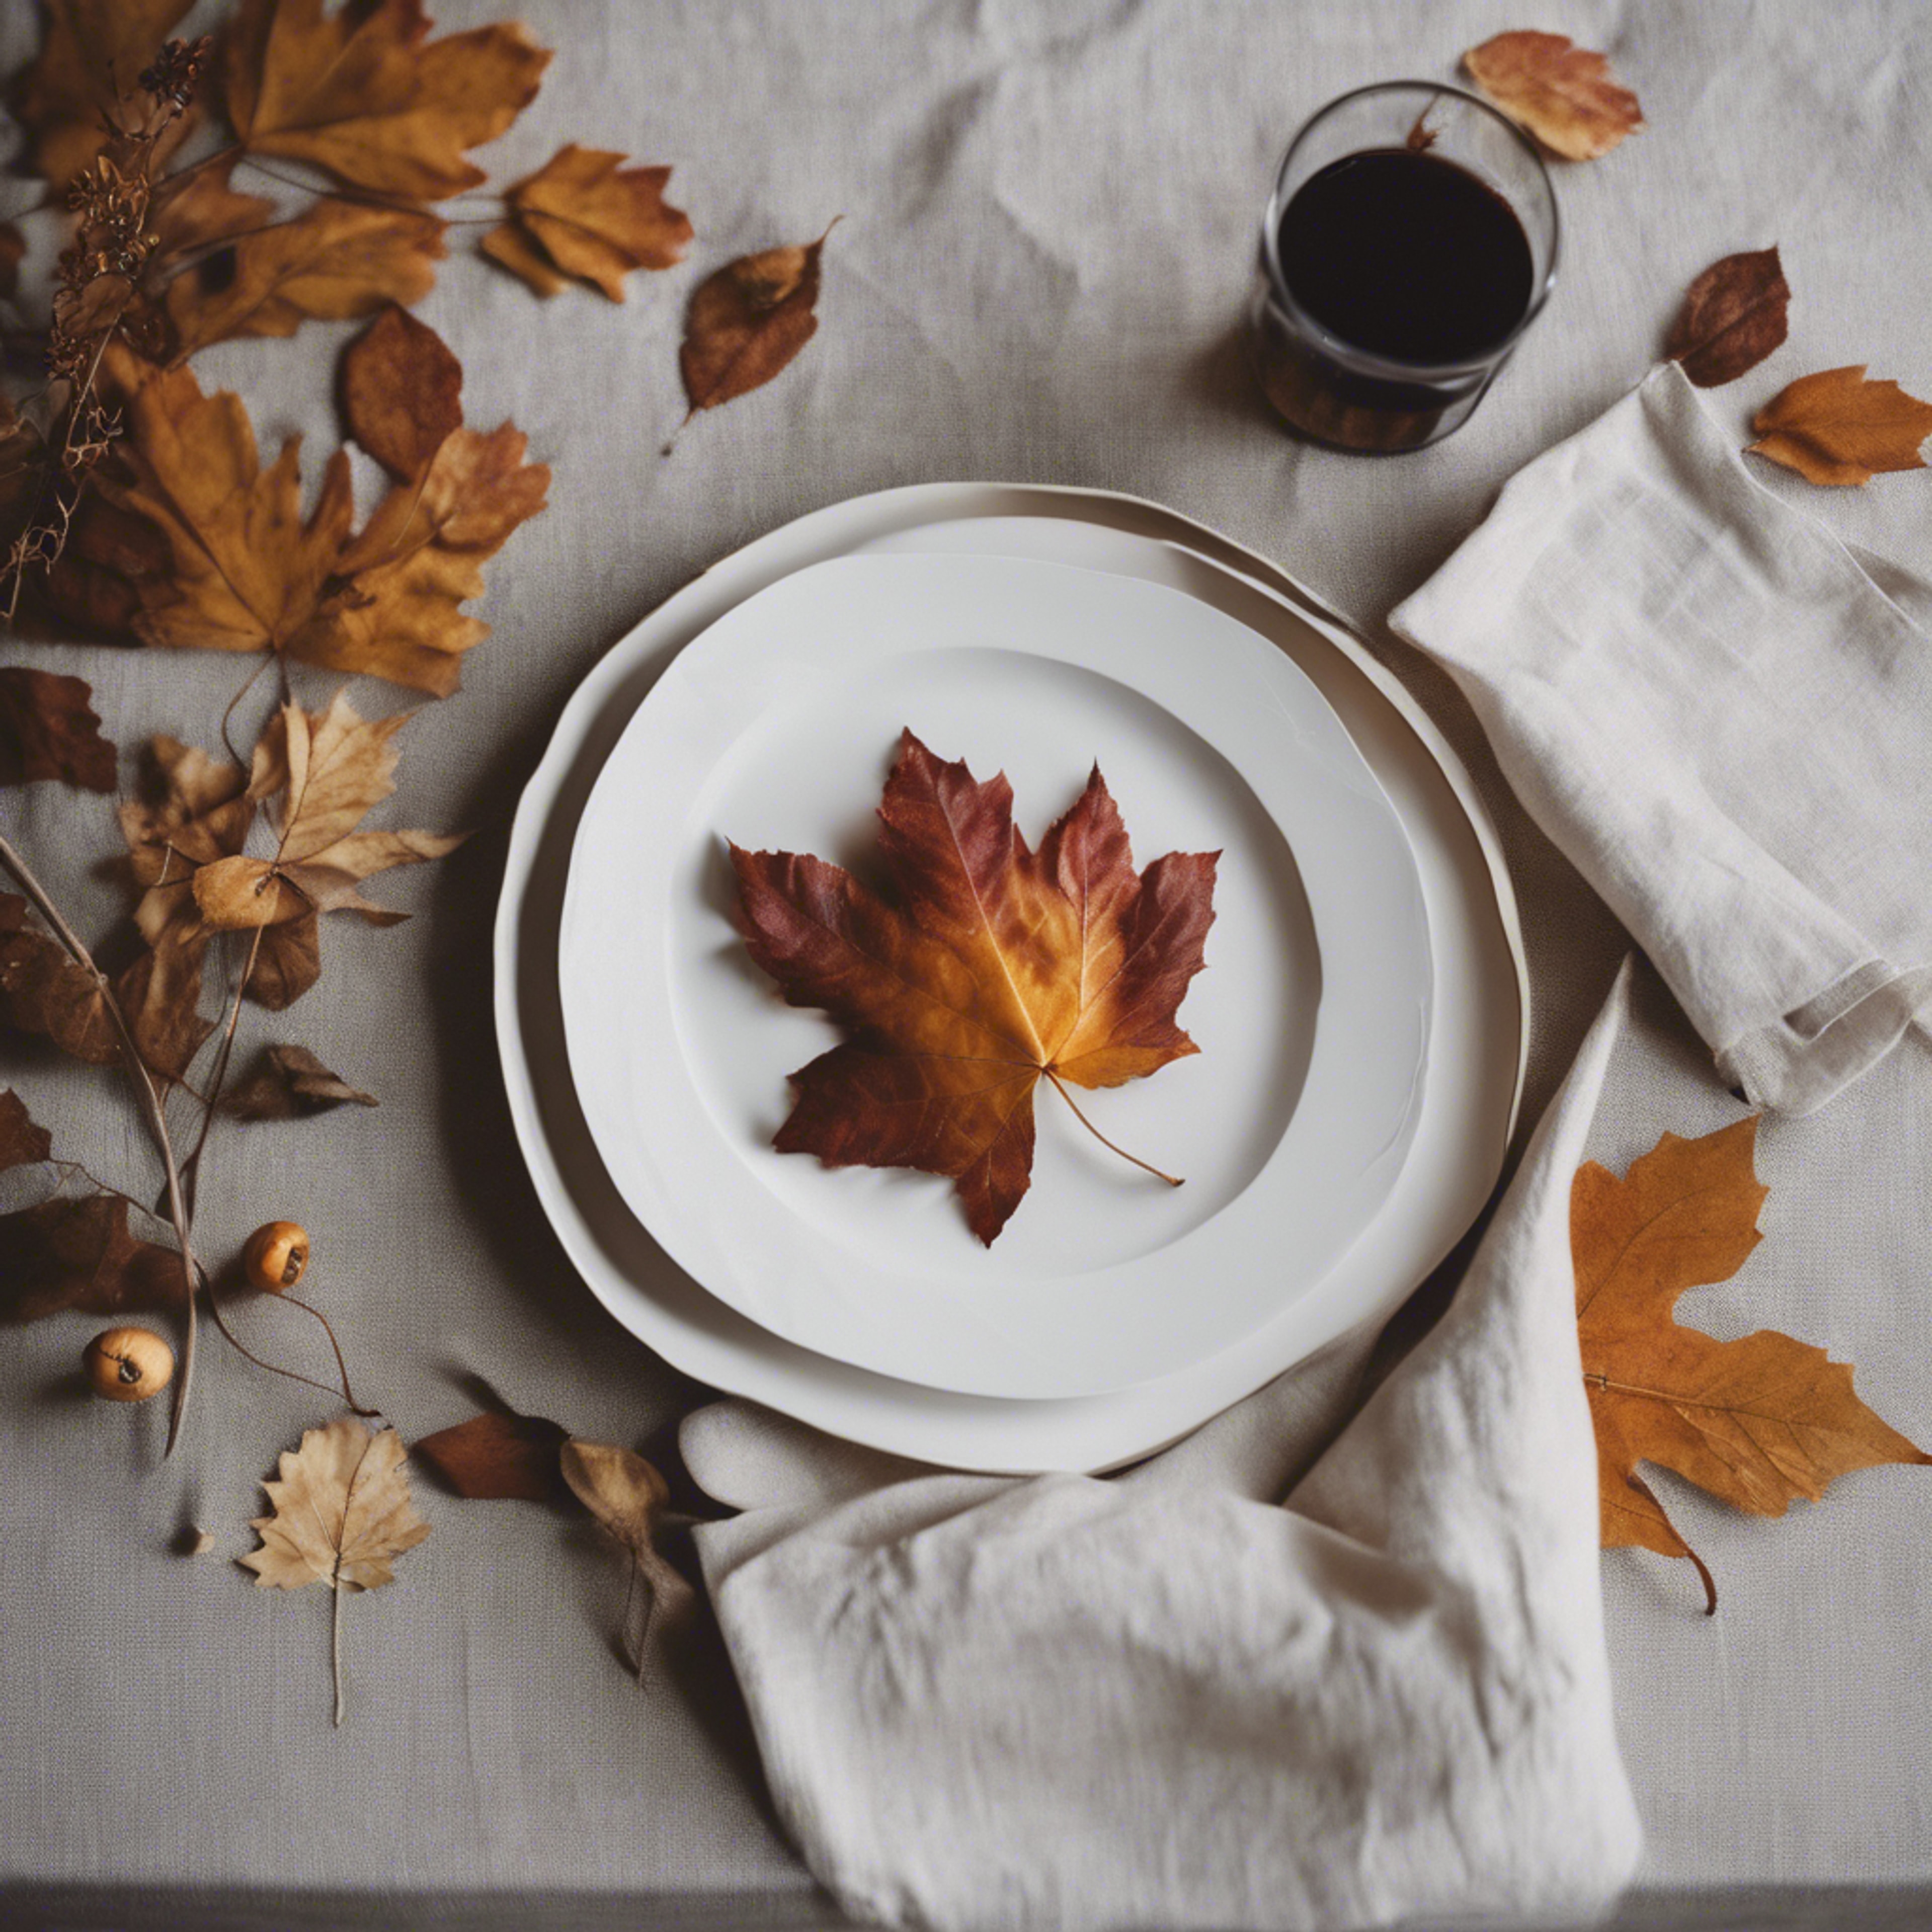 Simplicity-lover's Thanksgiving table decor with minimalistic white plates, natural linen napkins, and a few scattered autumn leaves. Tapeta[4fdd30c95e164a8e8309]